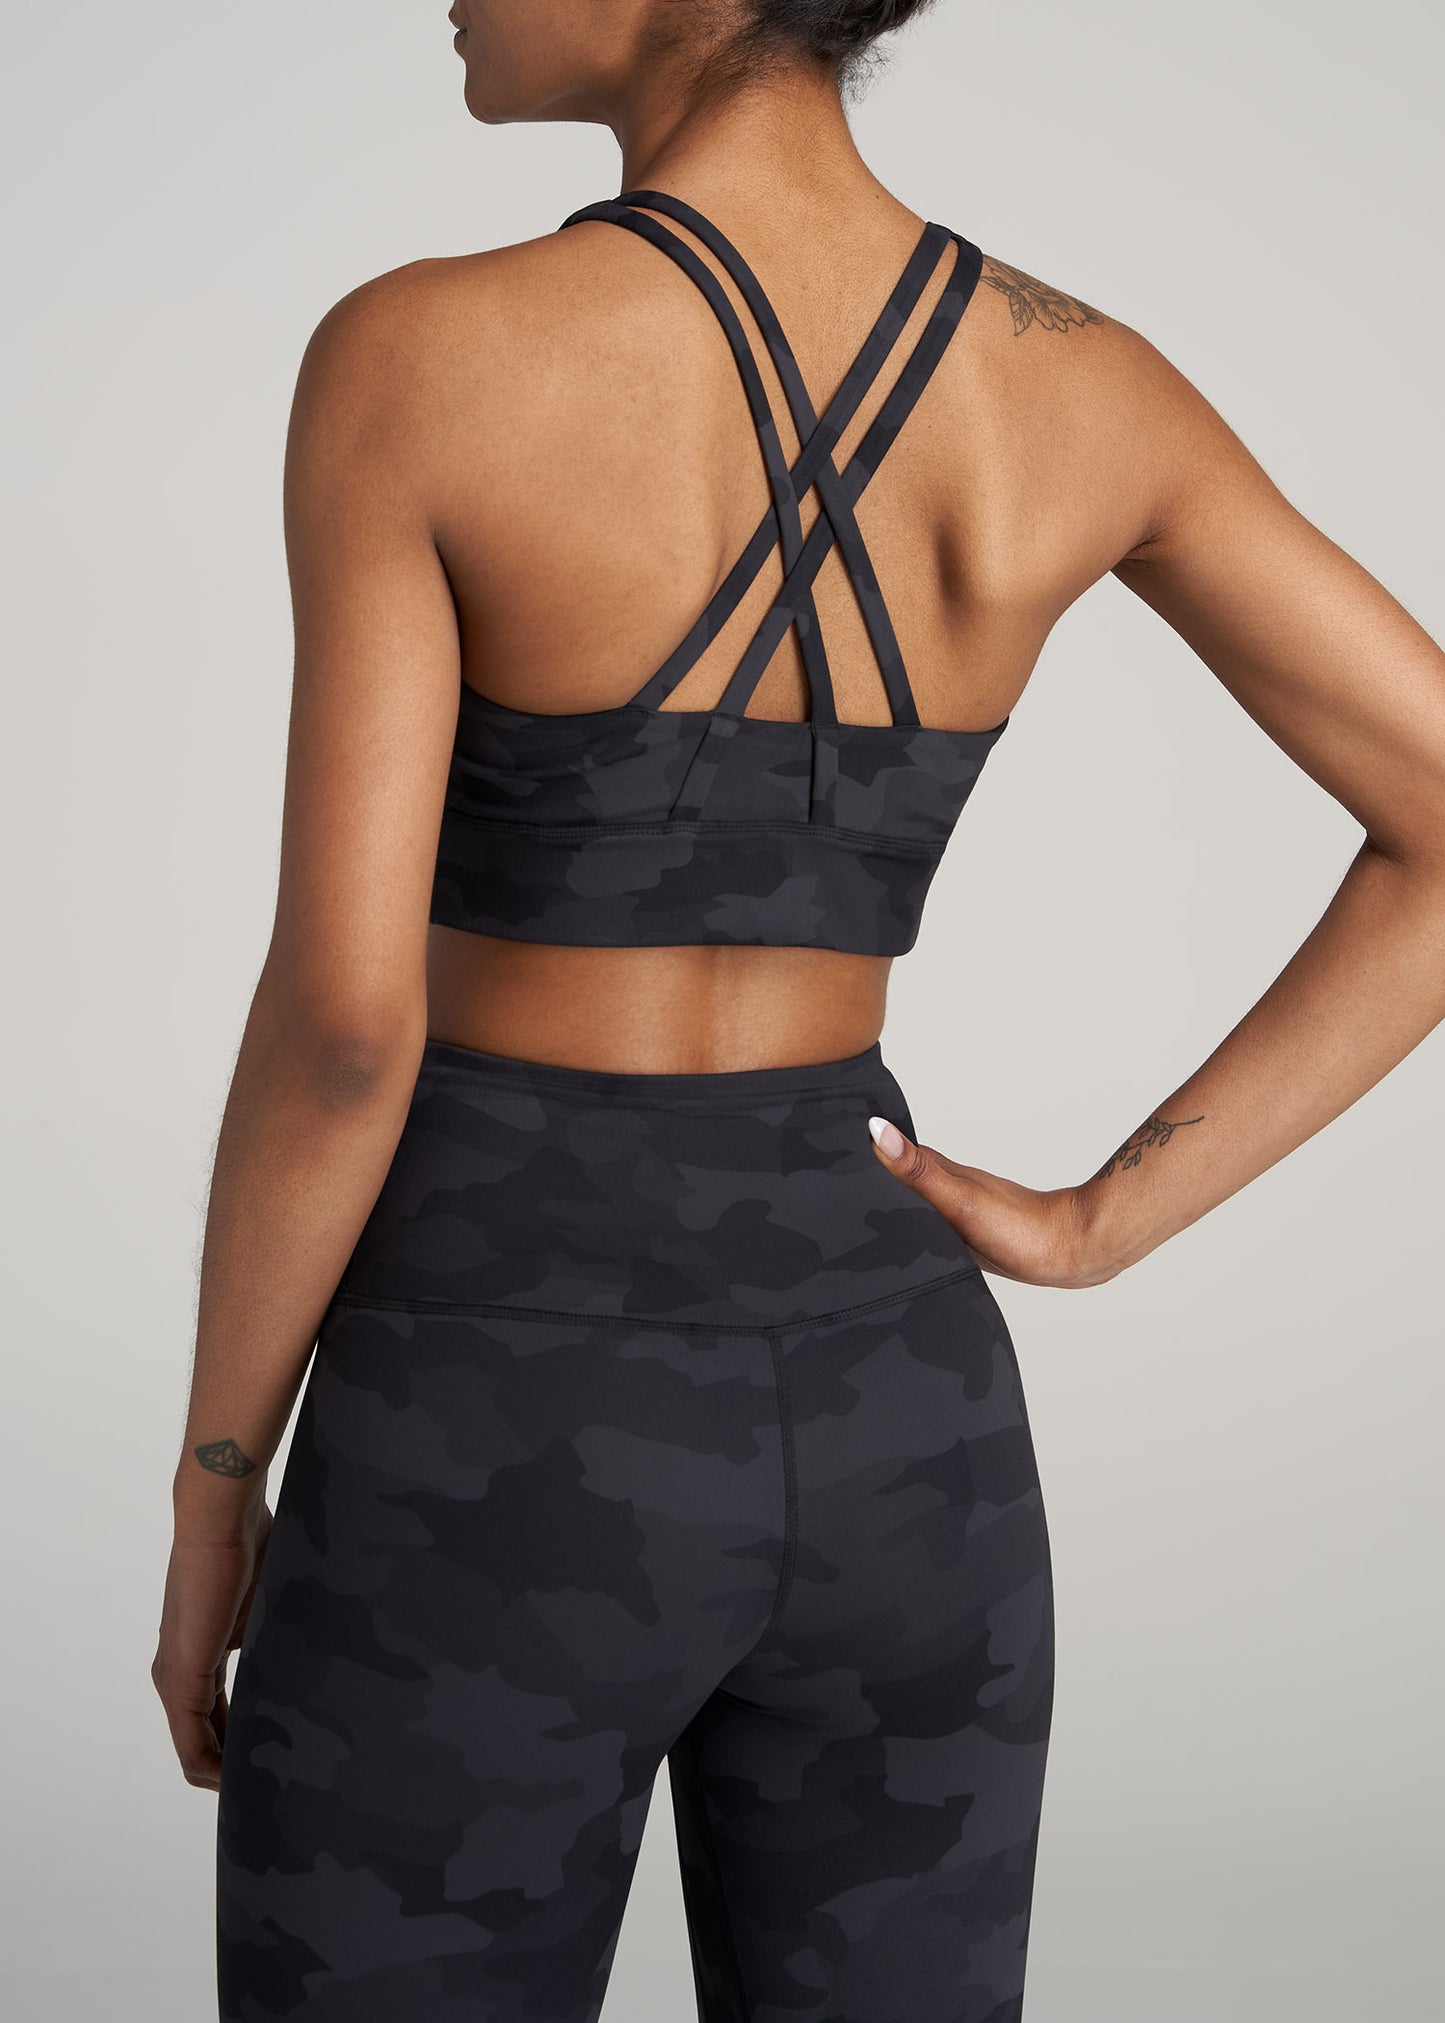 ASOS 4505 Tall exclusive plunge sports bra in animal